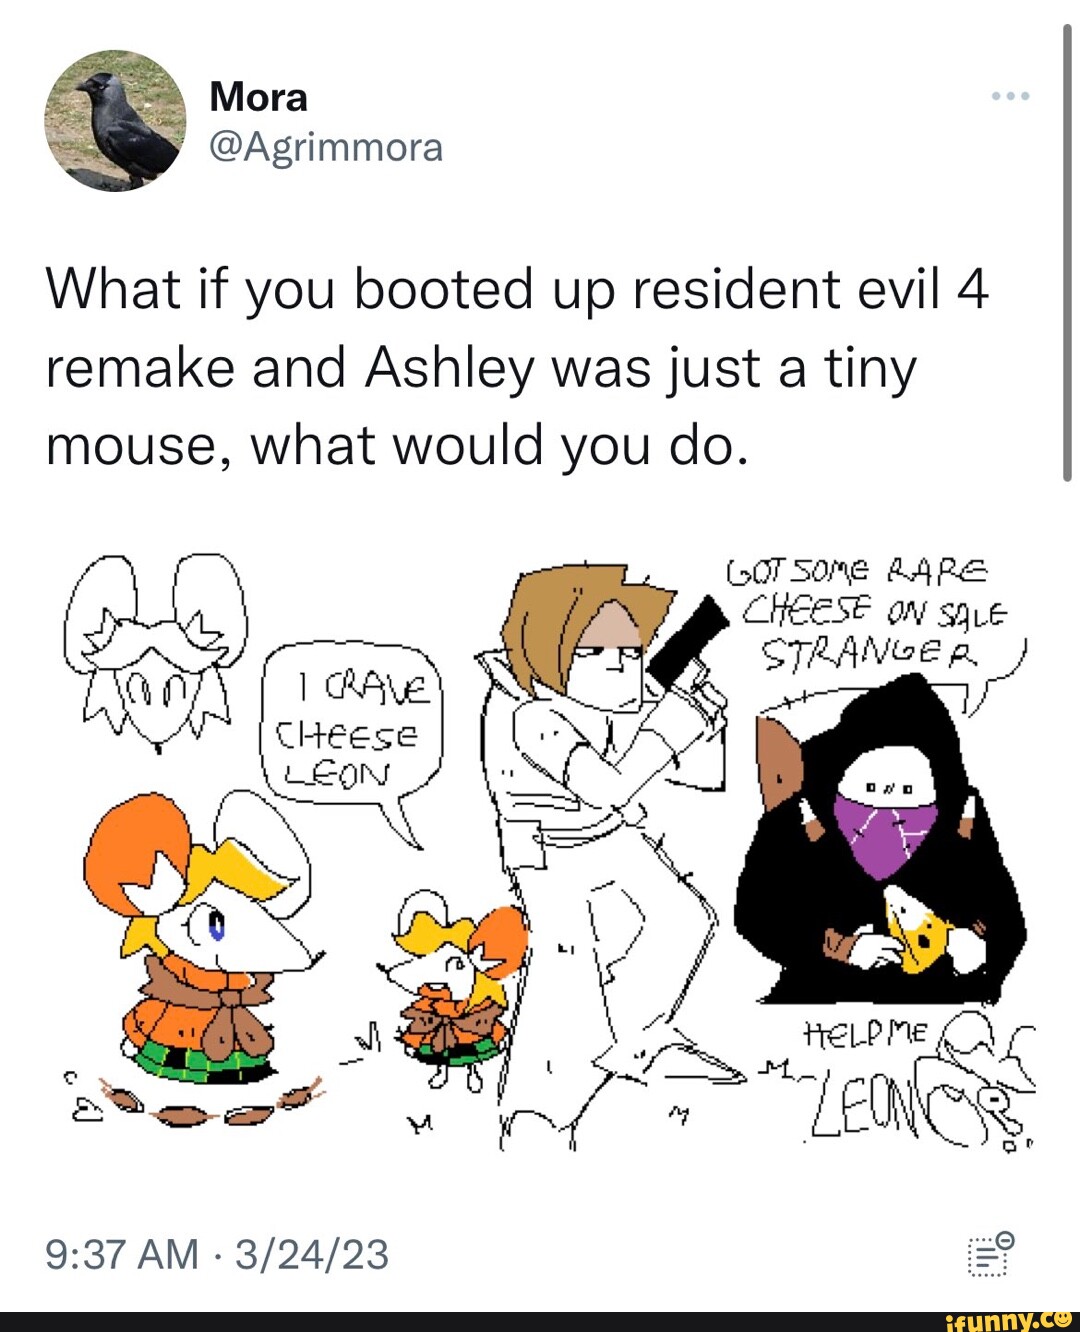 Mora What if you booted up resident evil 4 remake and Ashley was just a  tiny mouse, what would you do. LOT SORE BARE HELP Me LEN AM - WE - iFunny